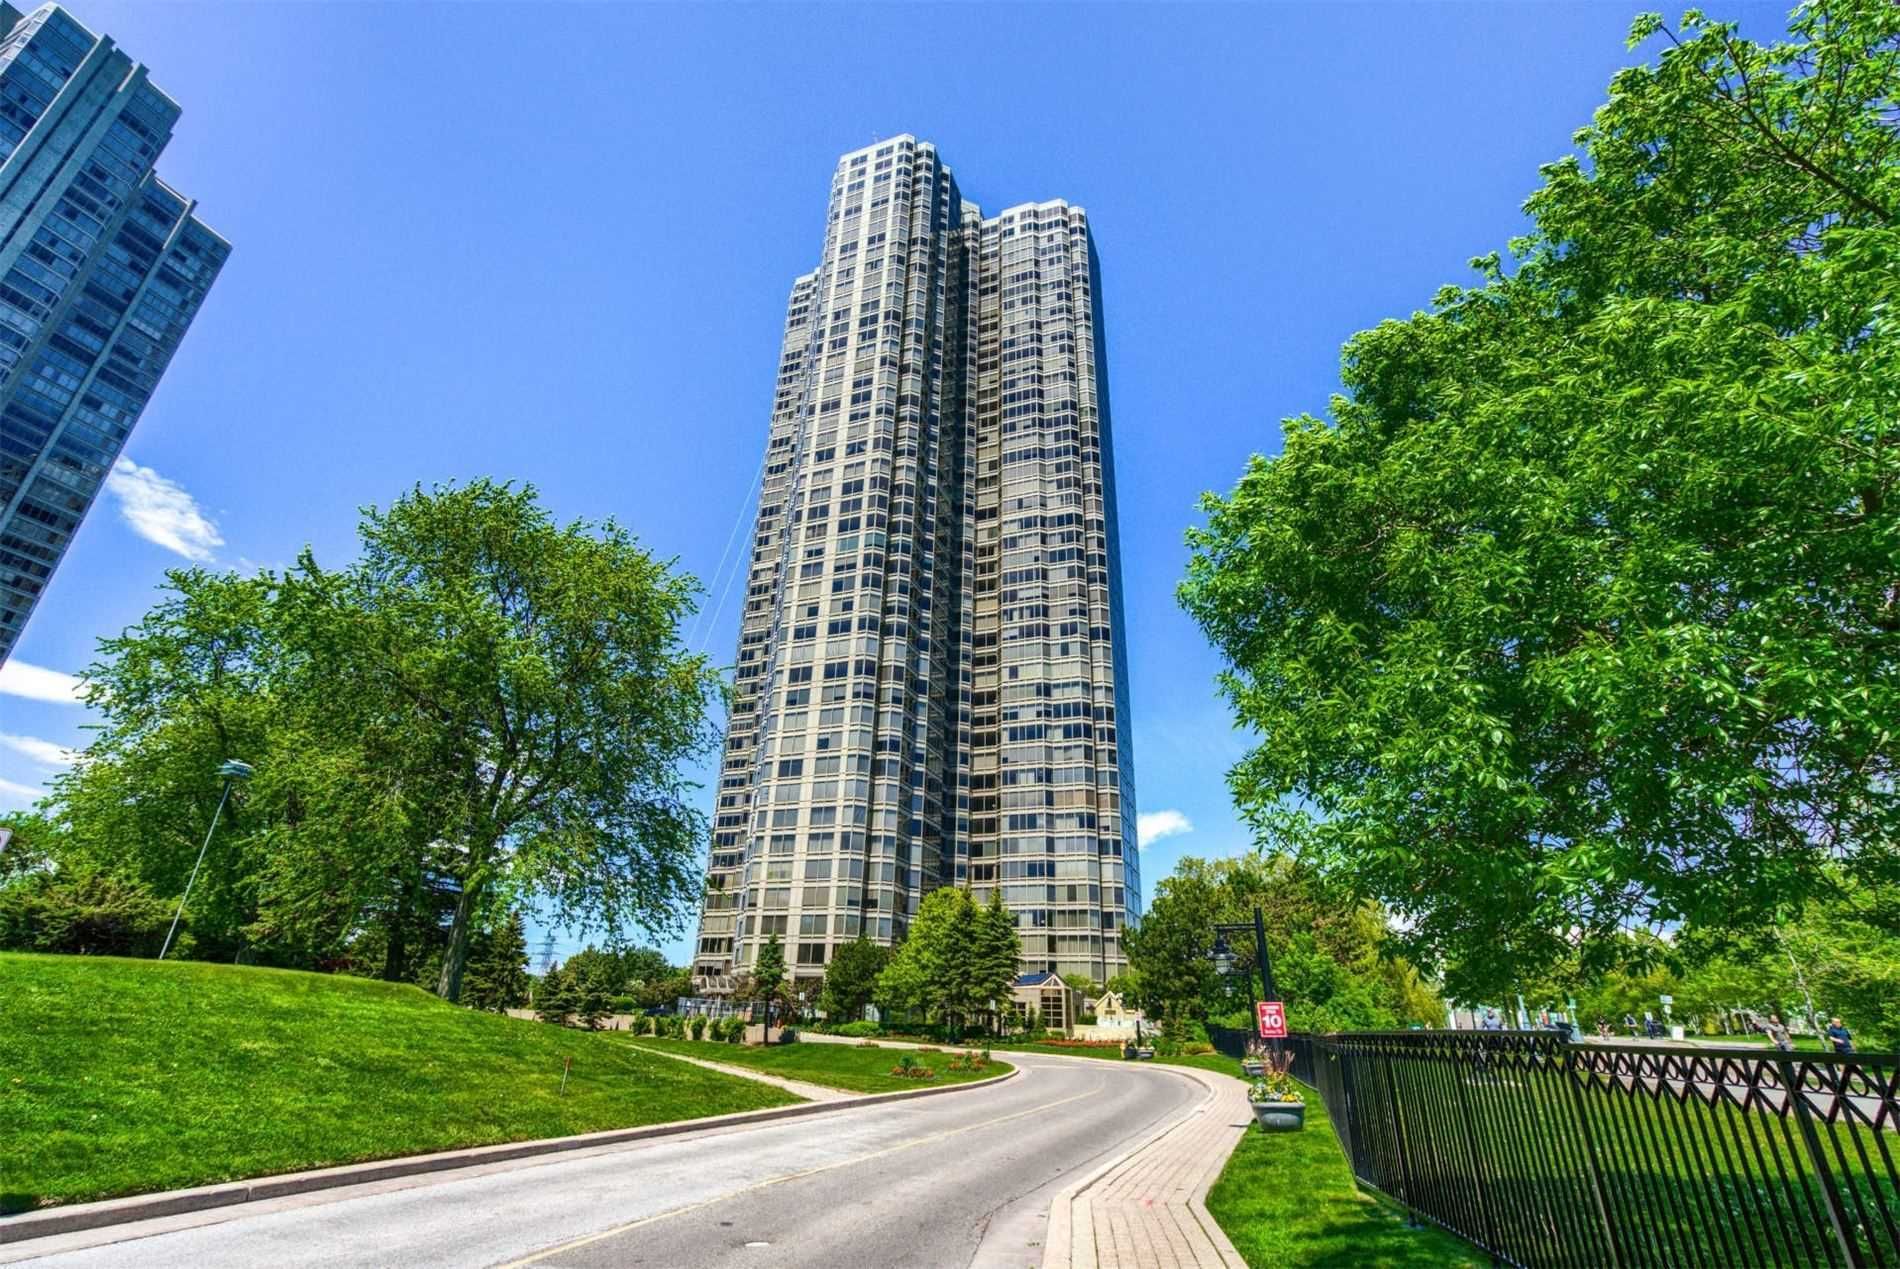 1 Palace Pier Crt. This condo at Palace Place Condos is located in  Etobicoke, Toronto - image #1 of 2 by Strata.ca